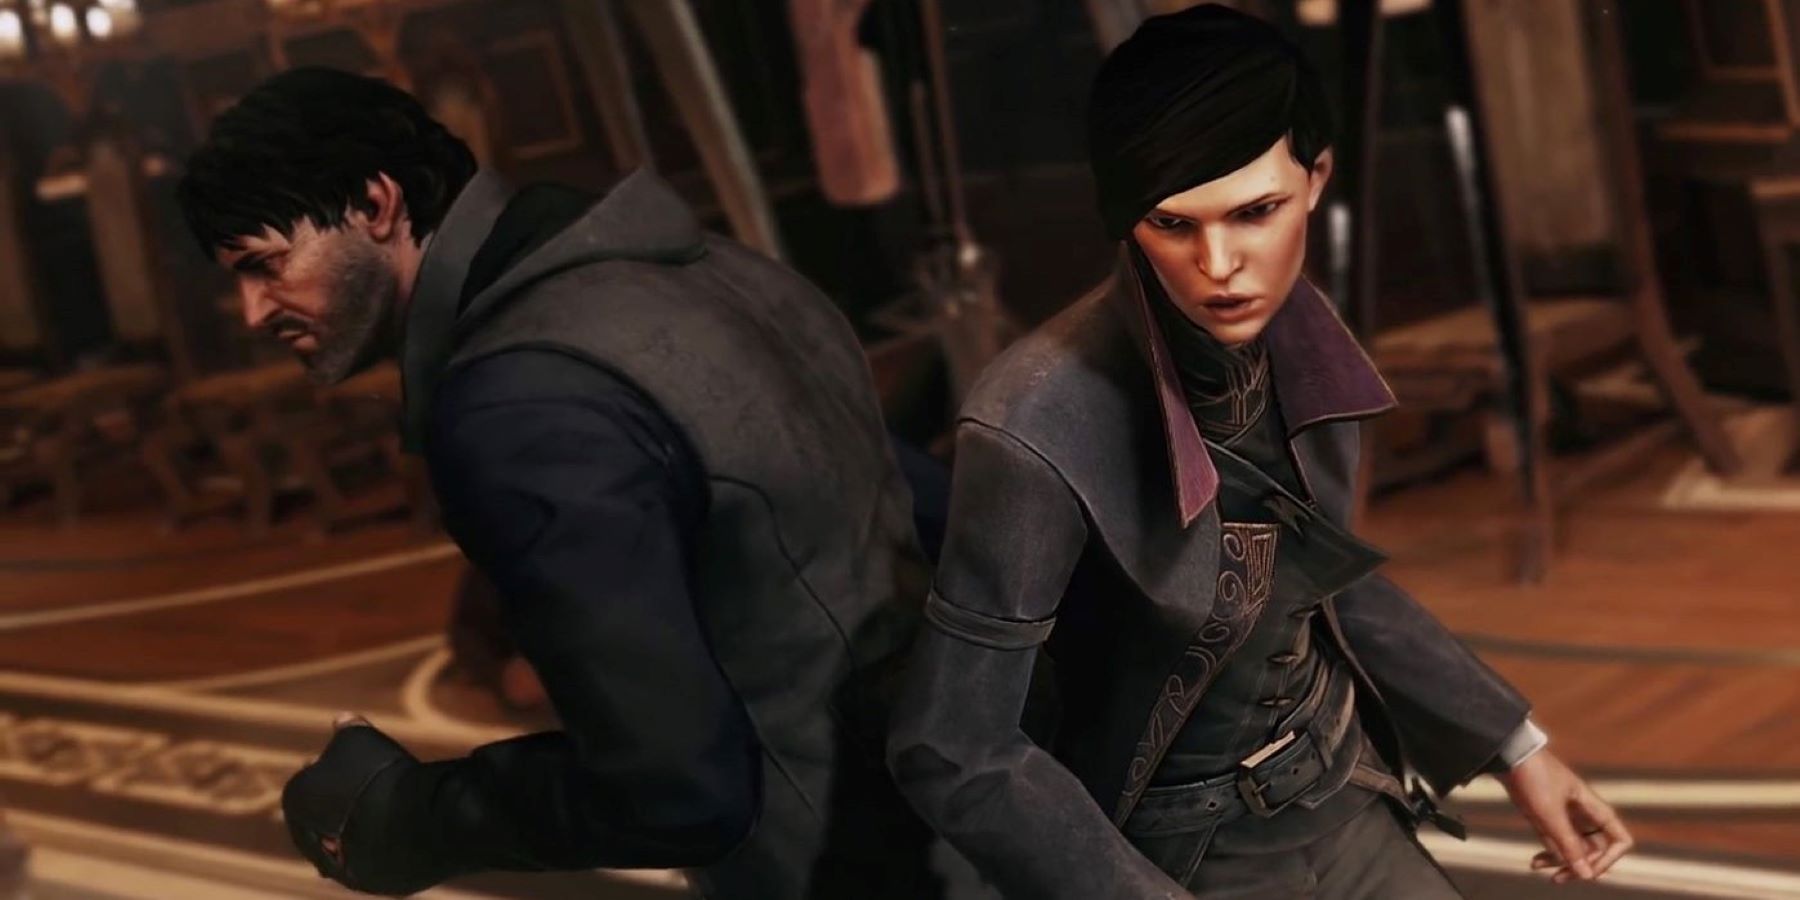 Corvo Attano and Emily Kaldwin Back to Back in Dishonored 2